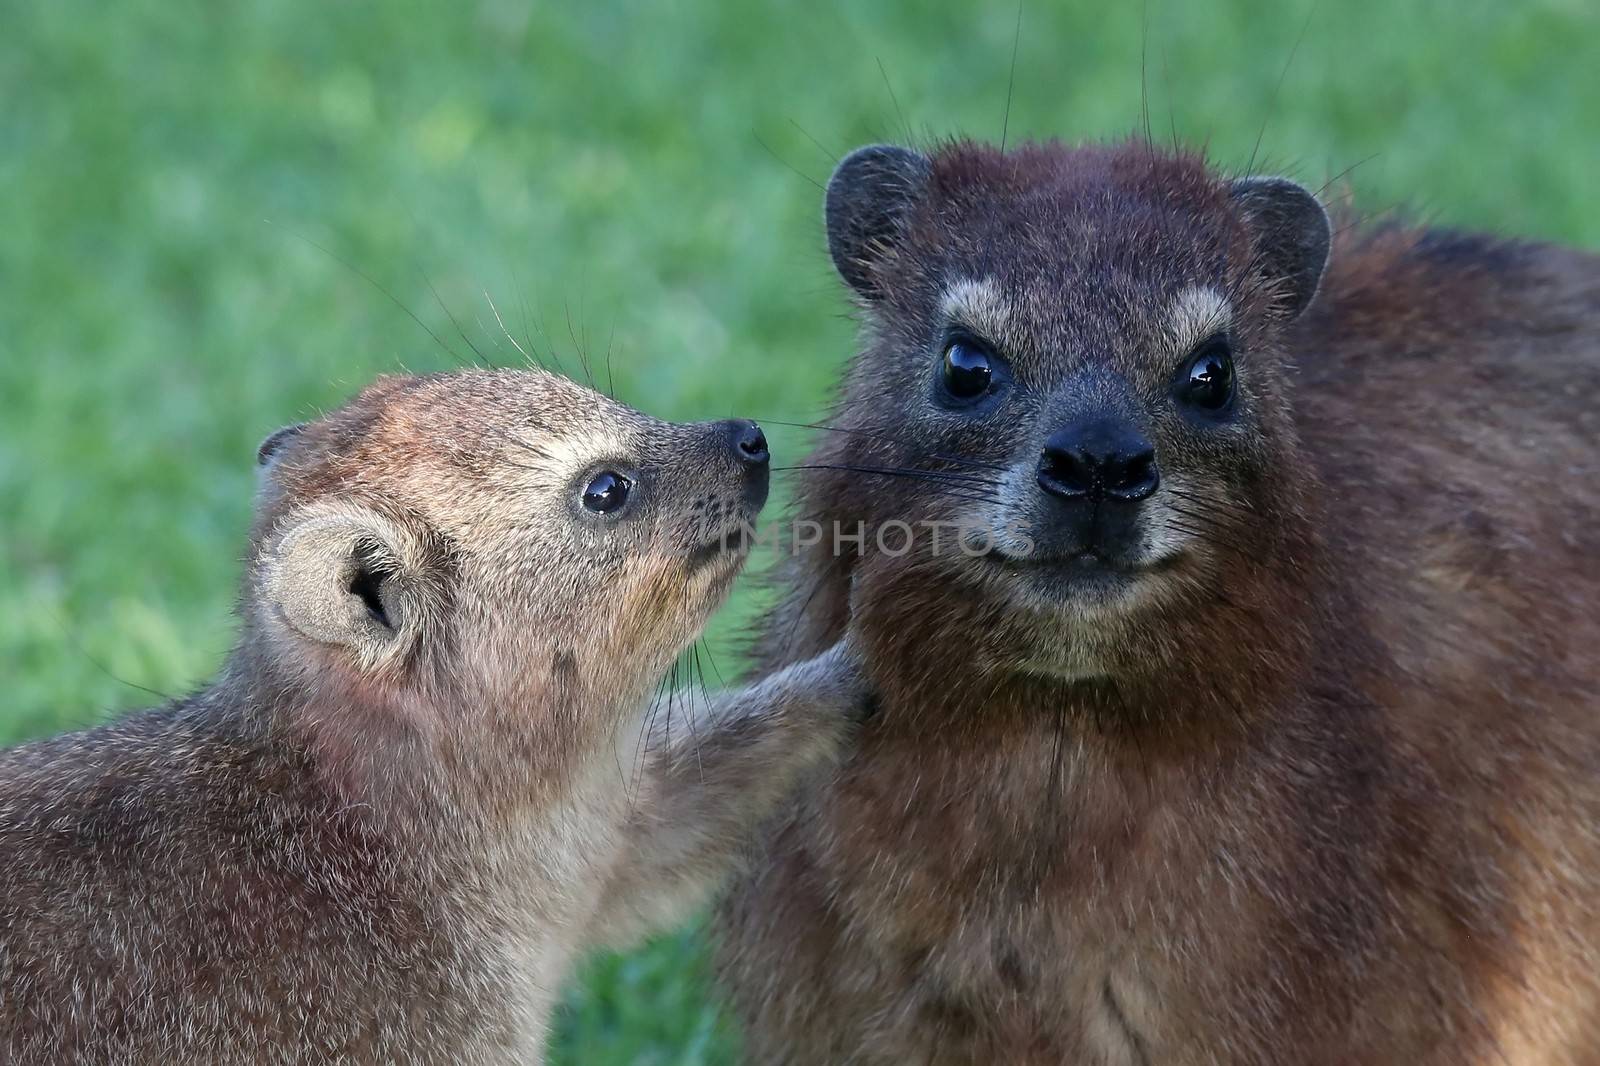 Cute Rock Hyrax Mother and Baby by fouroaks